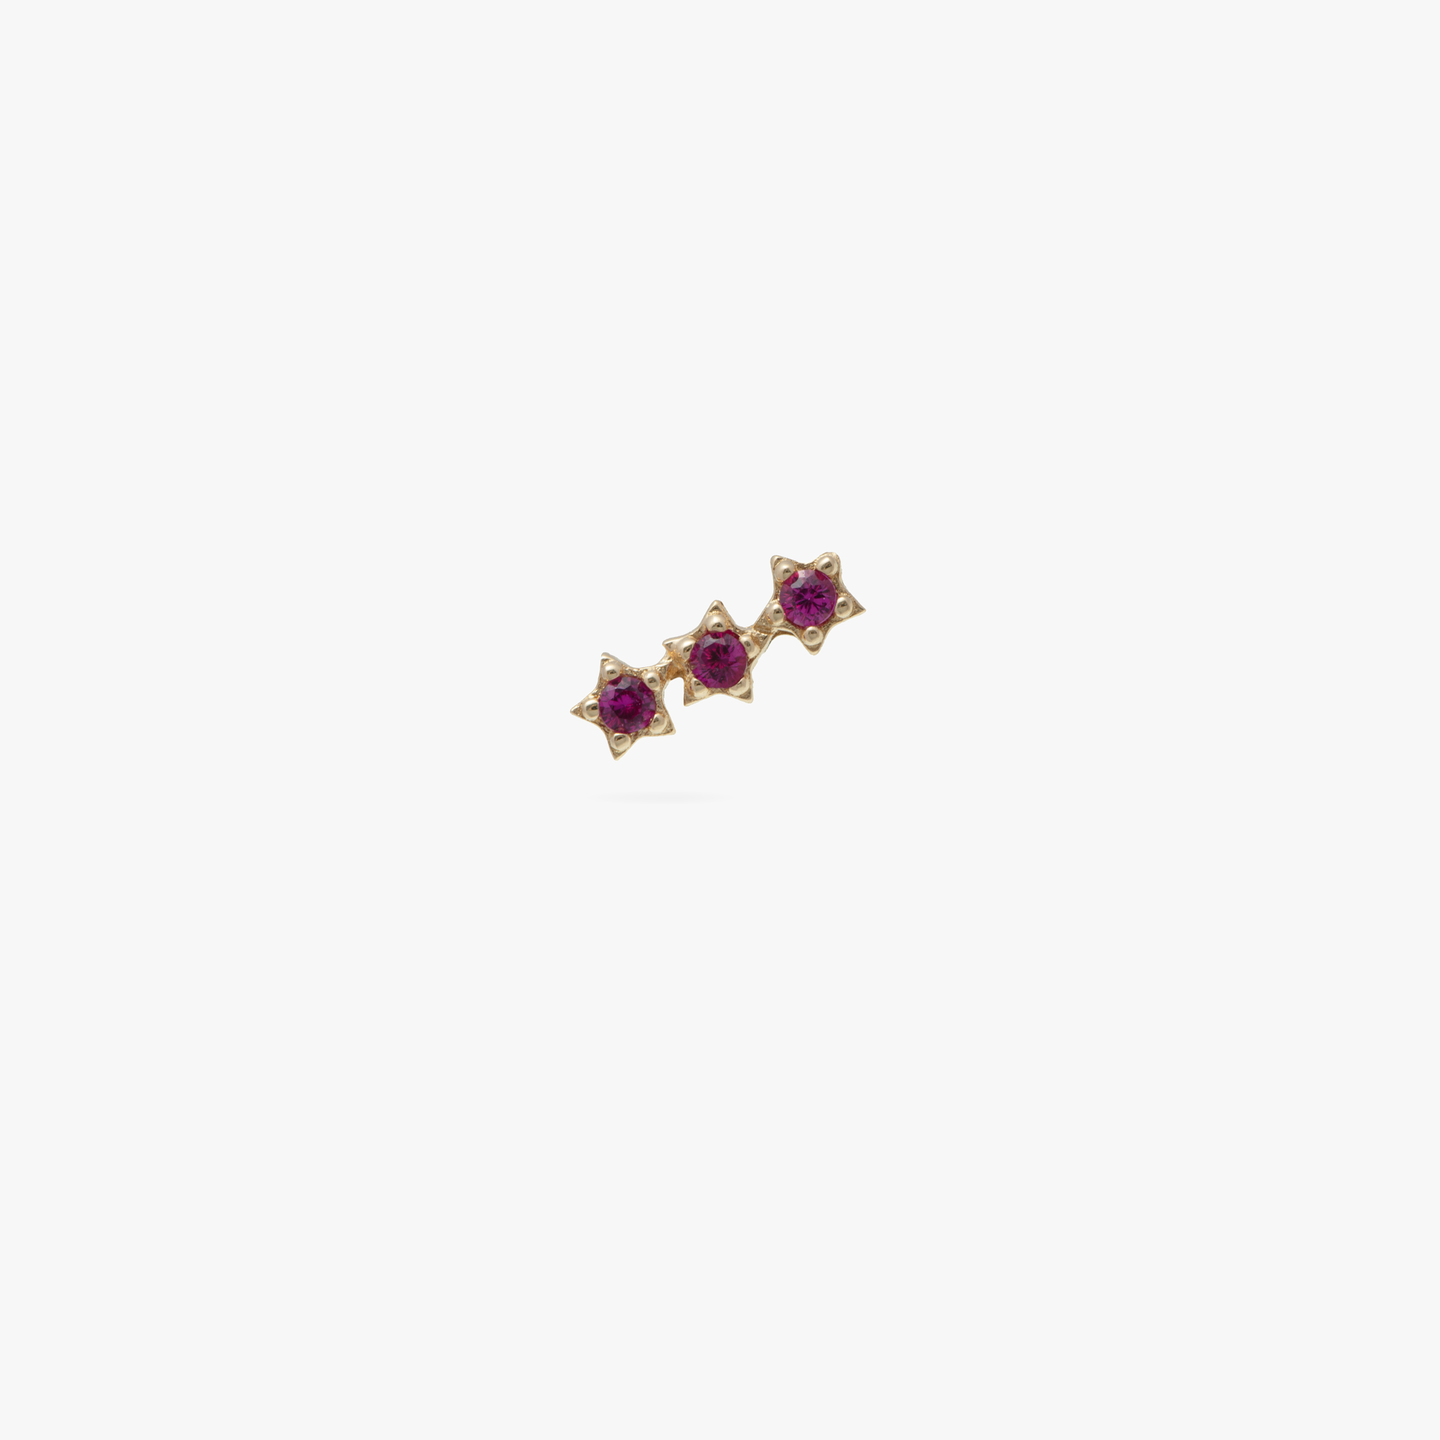 This is a 14k gold stud with 3 pink CZ's in a star shape color:null|gold/pink